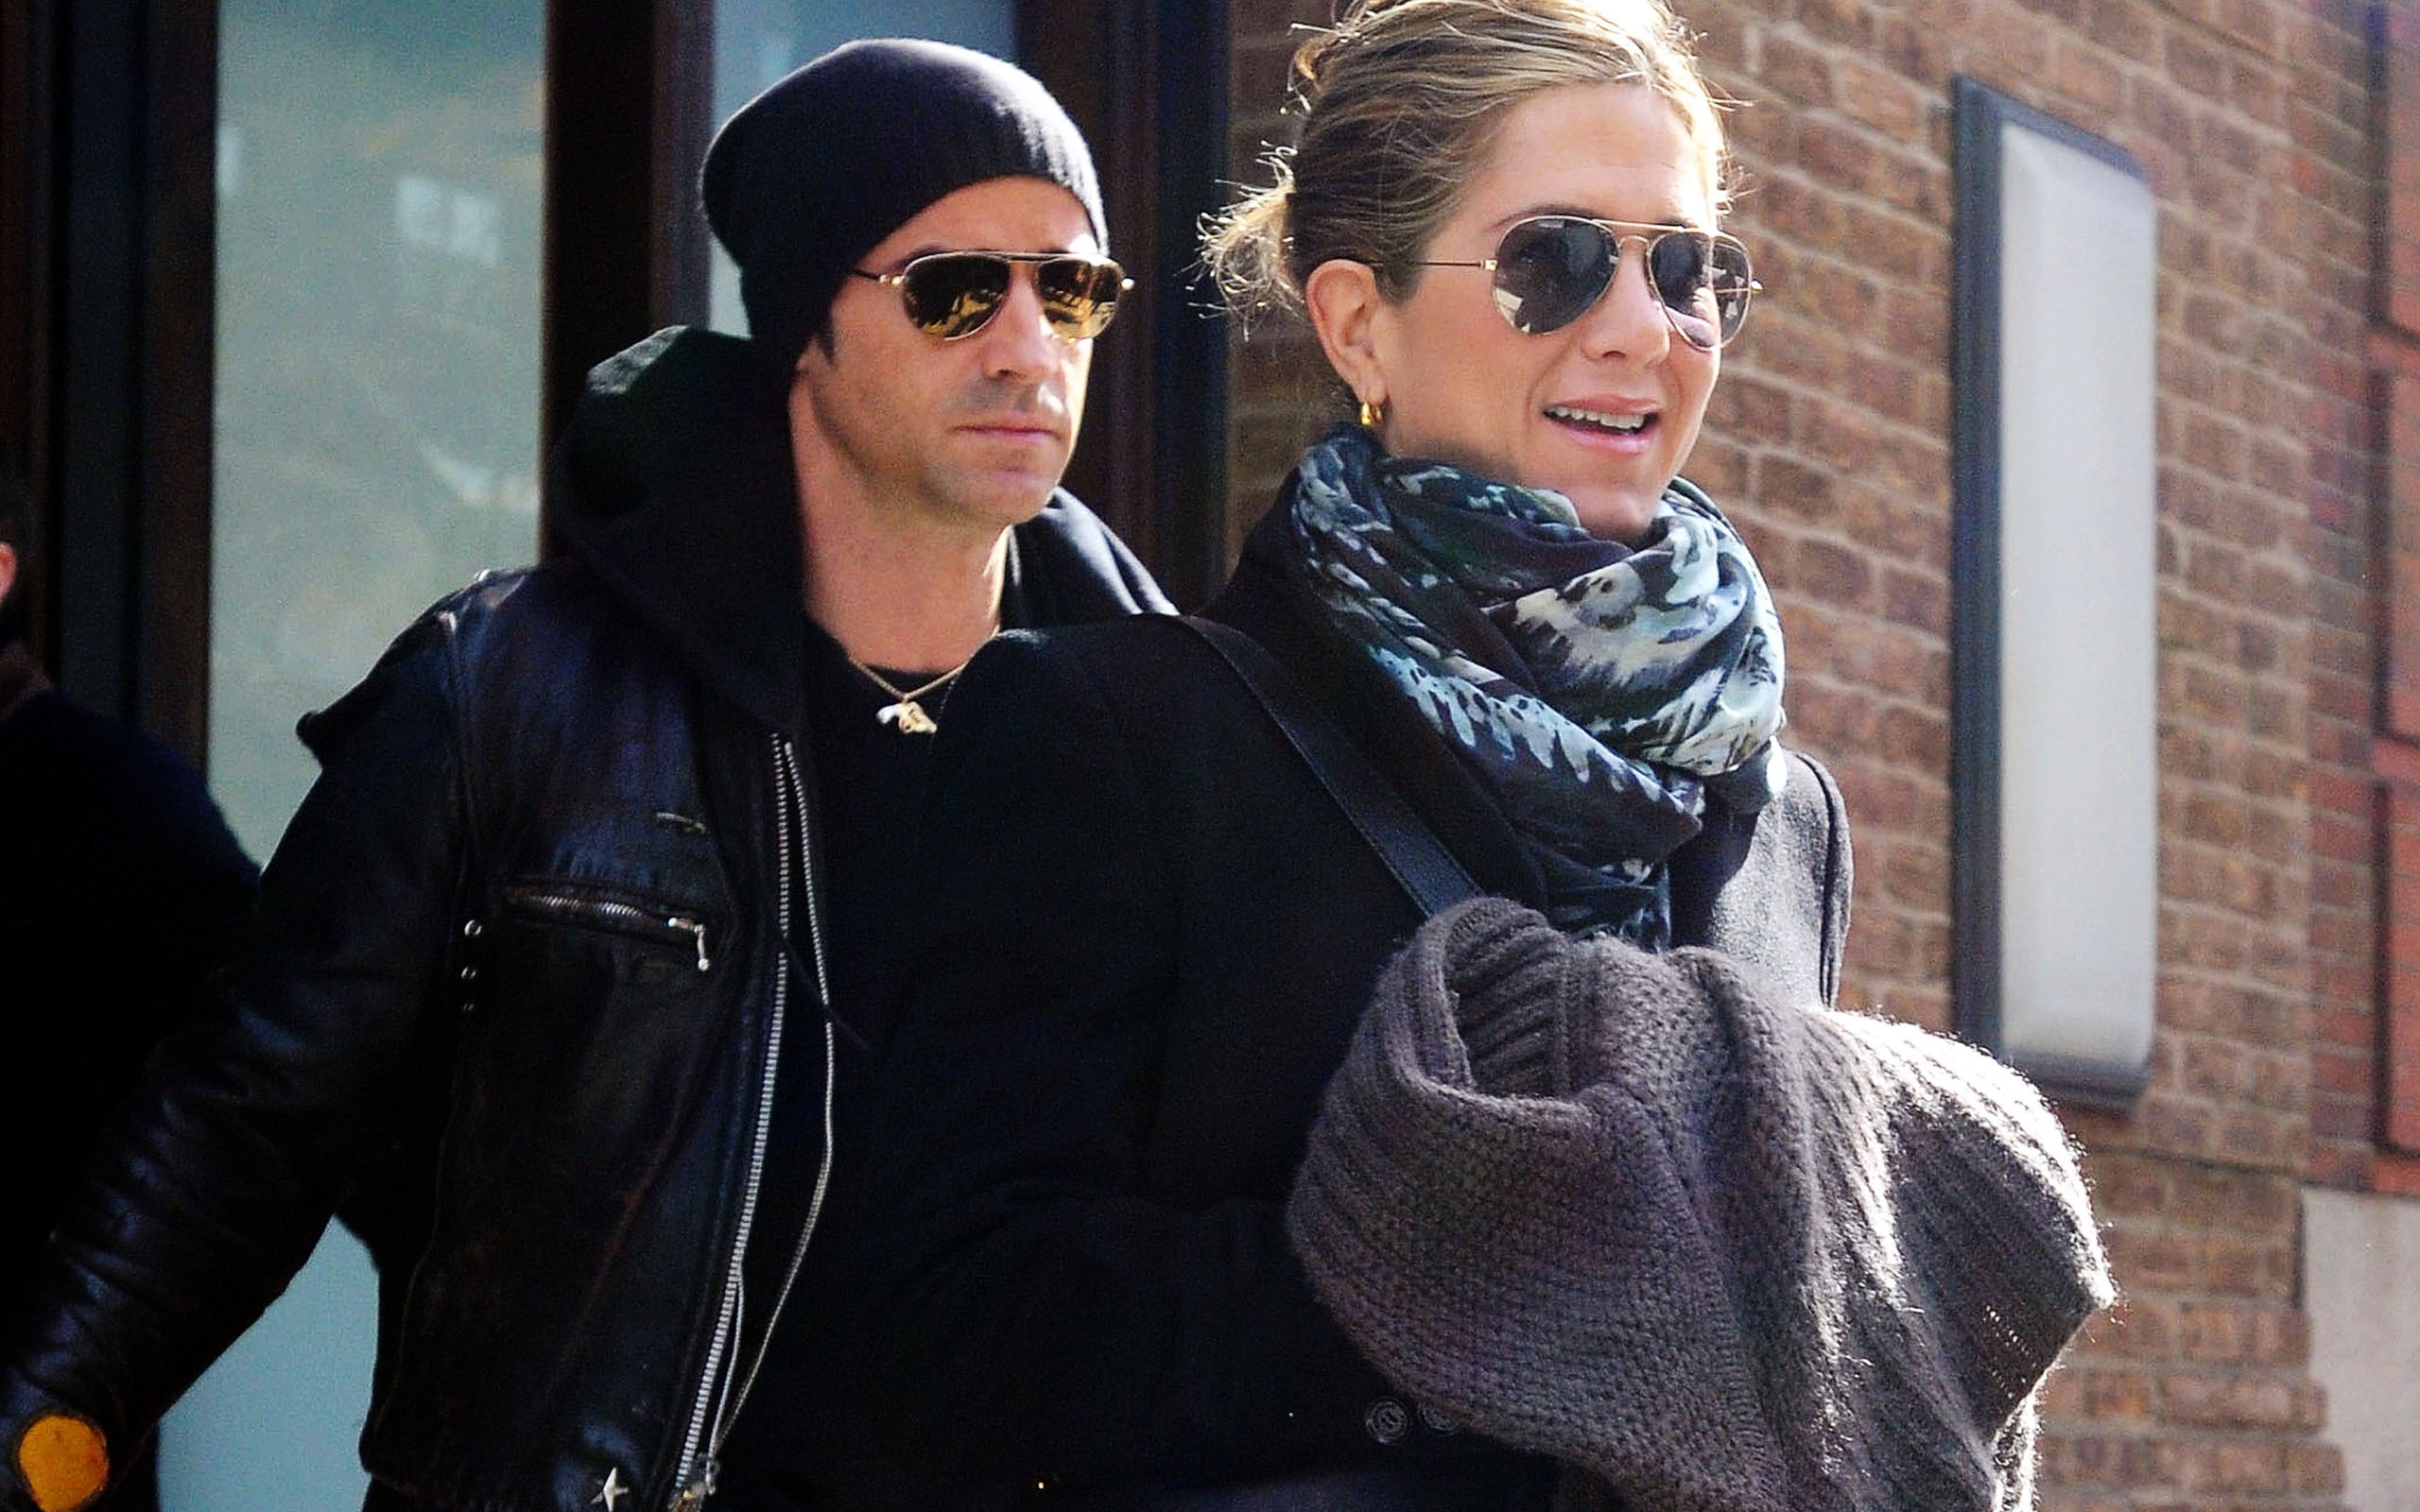 Justin Theroux and Jennifer Aniston for 2560 x 1600 widescreen resolution